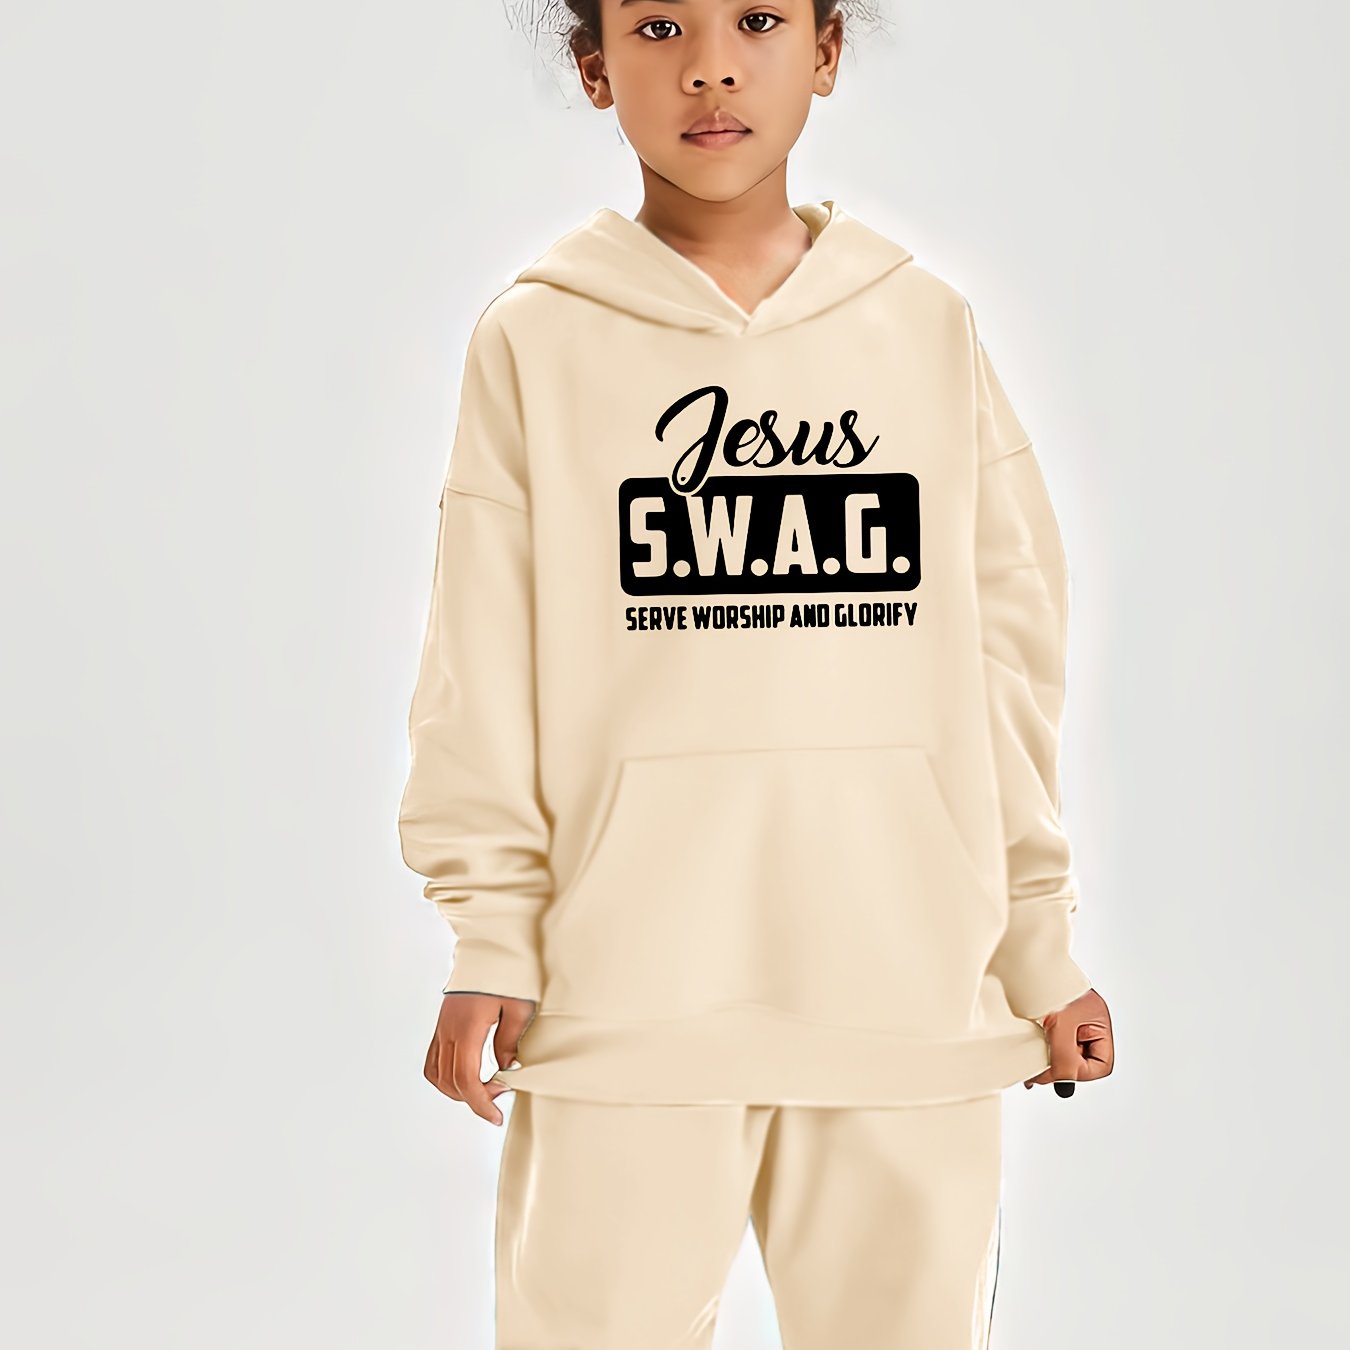 Jesus Swag: Serve Worship And Glorifty Youth Christian Casual Outfit claimedbygoddesigns